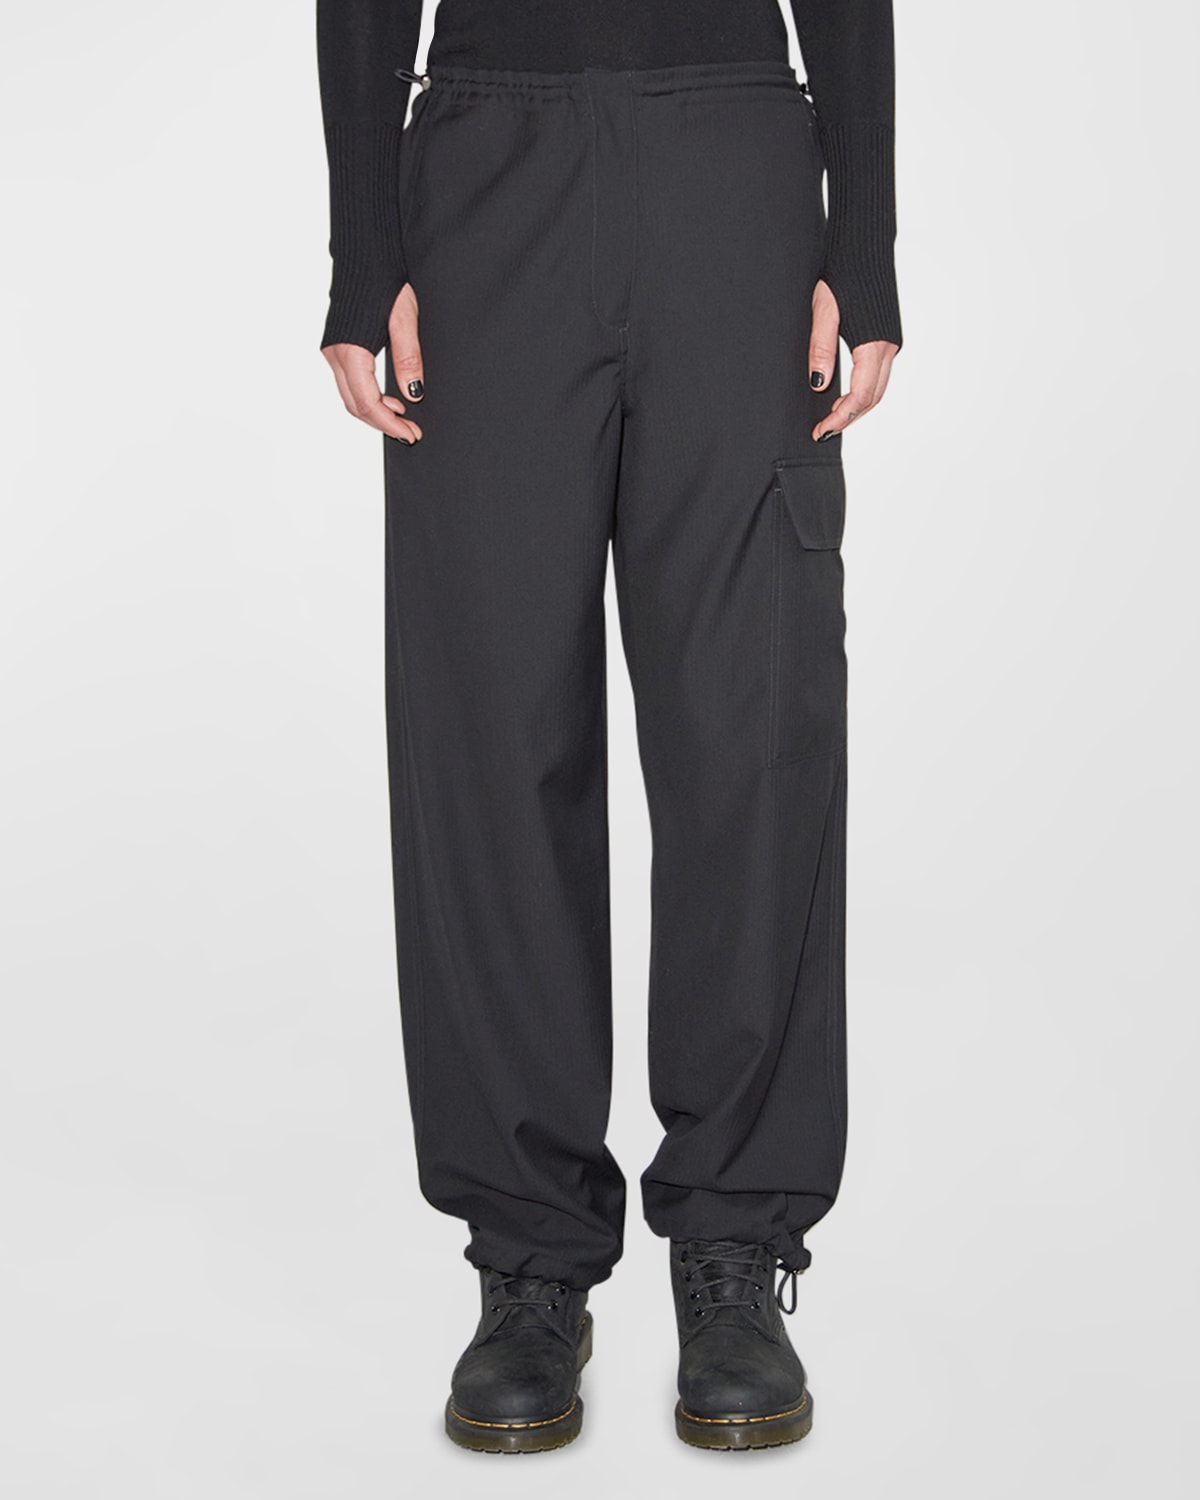 The Freestyle Cargo Pants